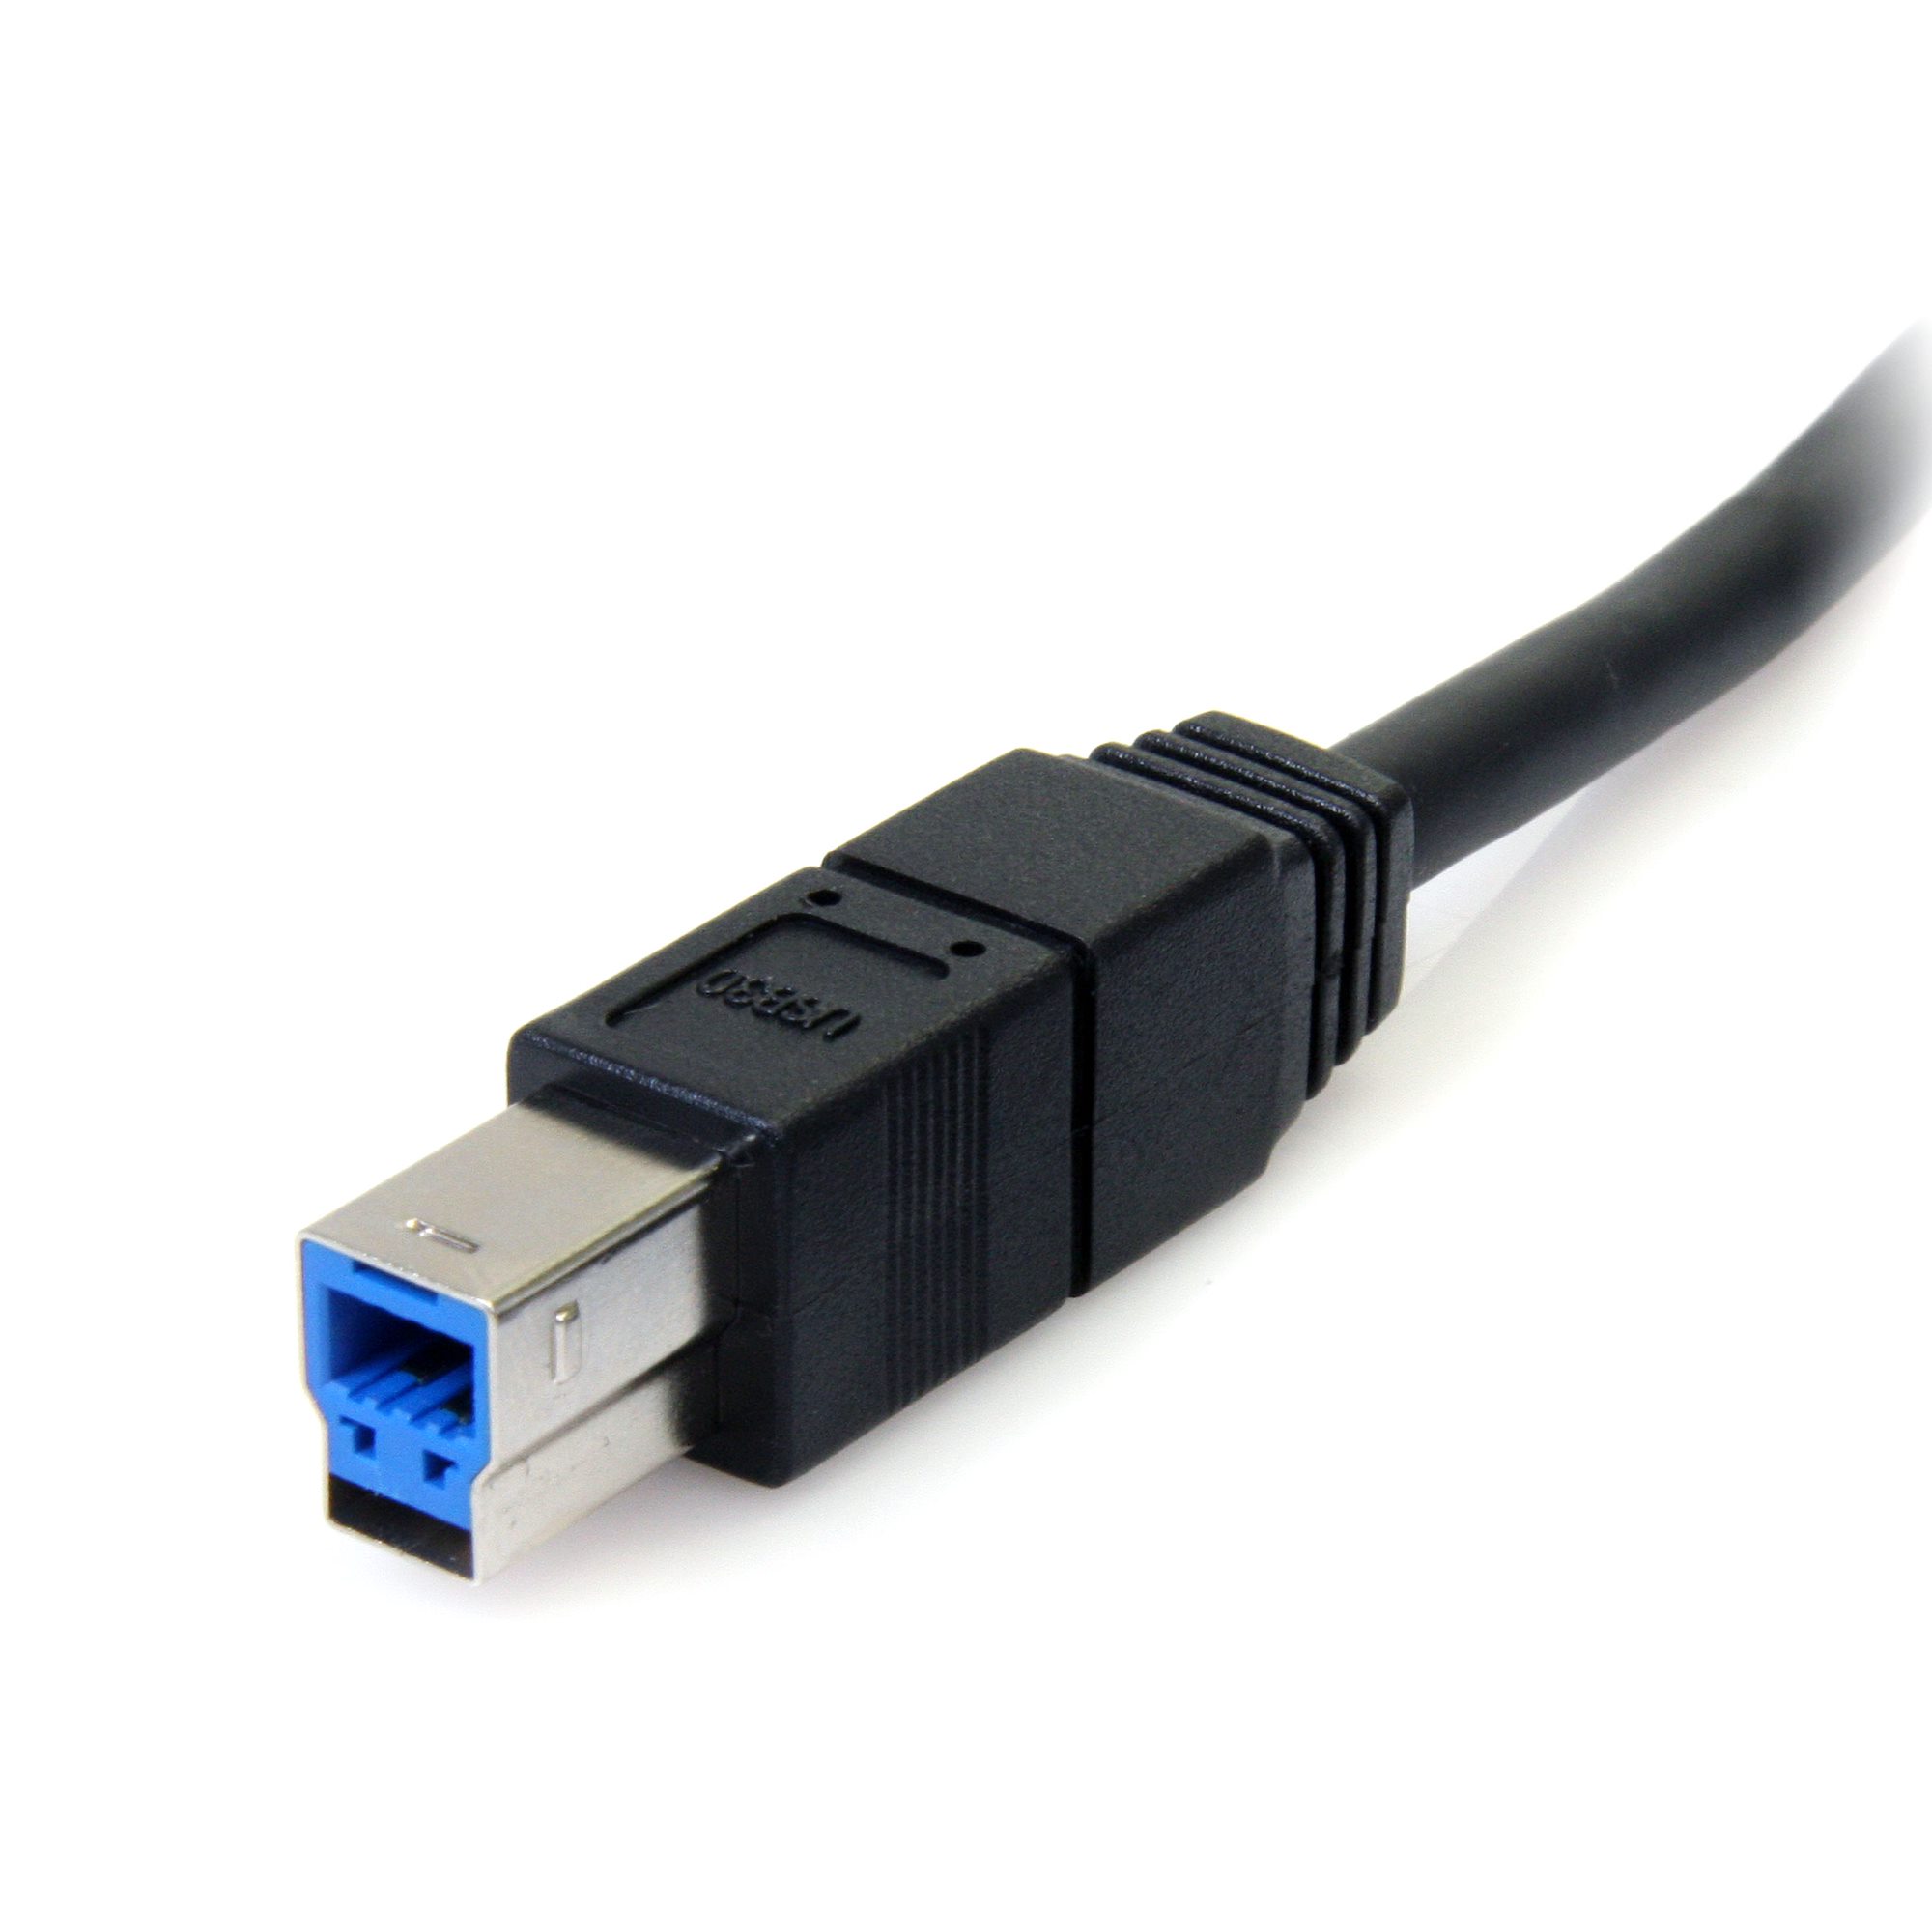 3ft (0.9m) USB 2.0 USB-C to USB-B Cable M/M - Black, USB-C Cables, USB-C  Cables, Adapters, and Hubs